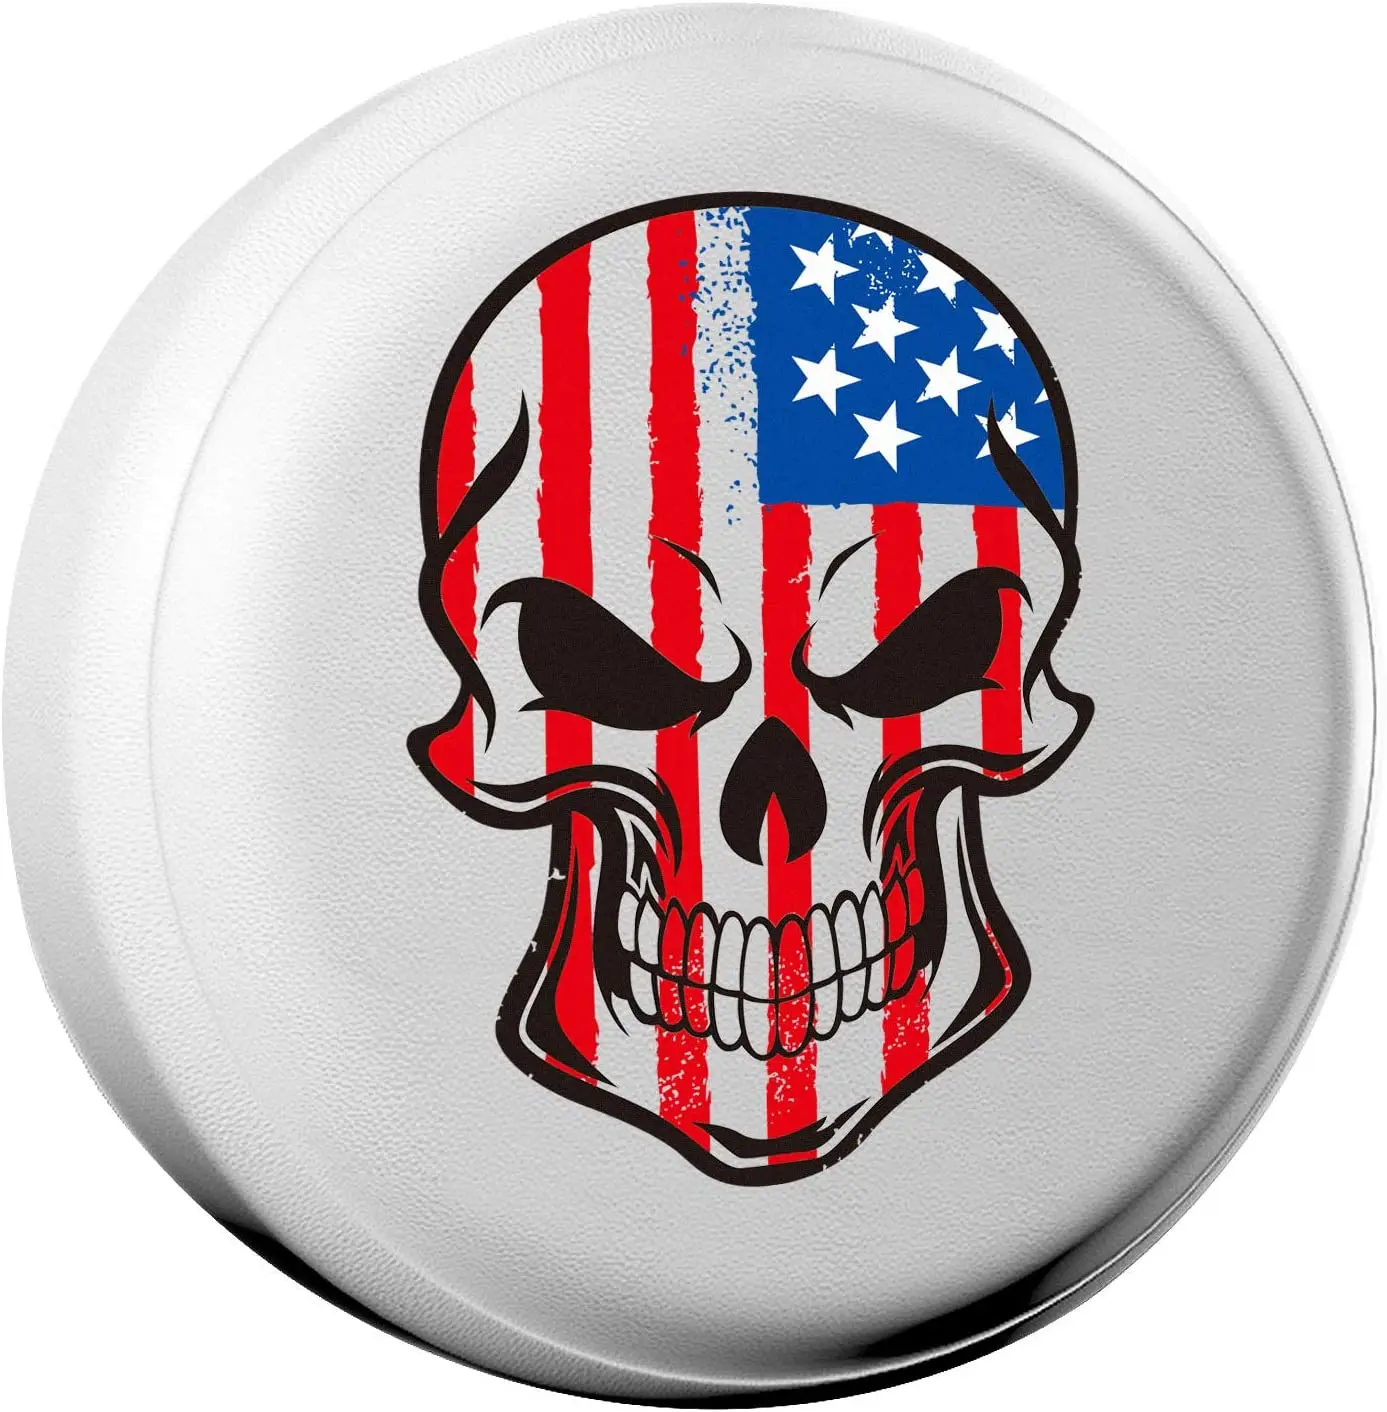 

Amfor Spare Tire Cover, Universal Fit for Jeep, Trailer, RV, SUV, Truck and Many Vehicle, Wheel Diameter 26" - 27", Weatherproof